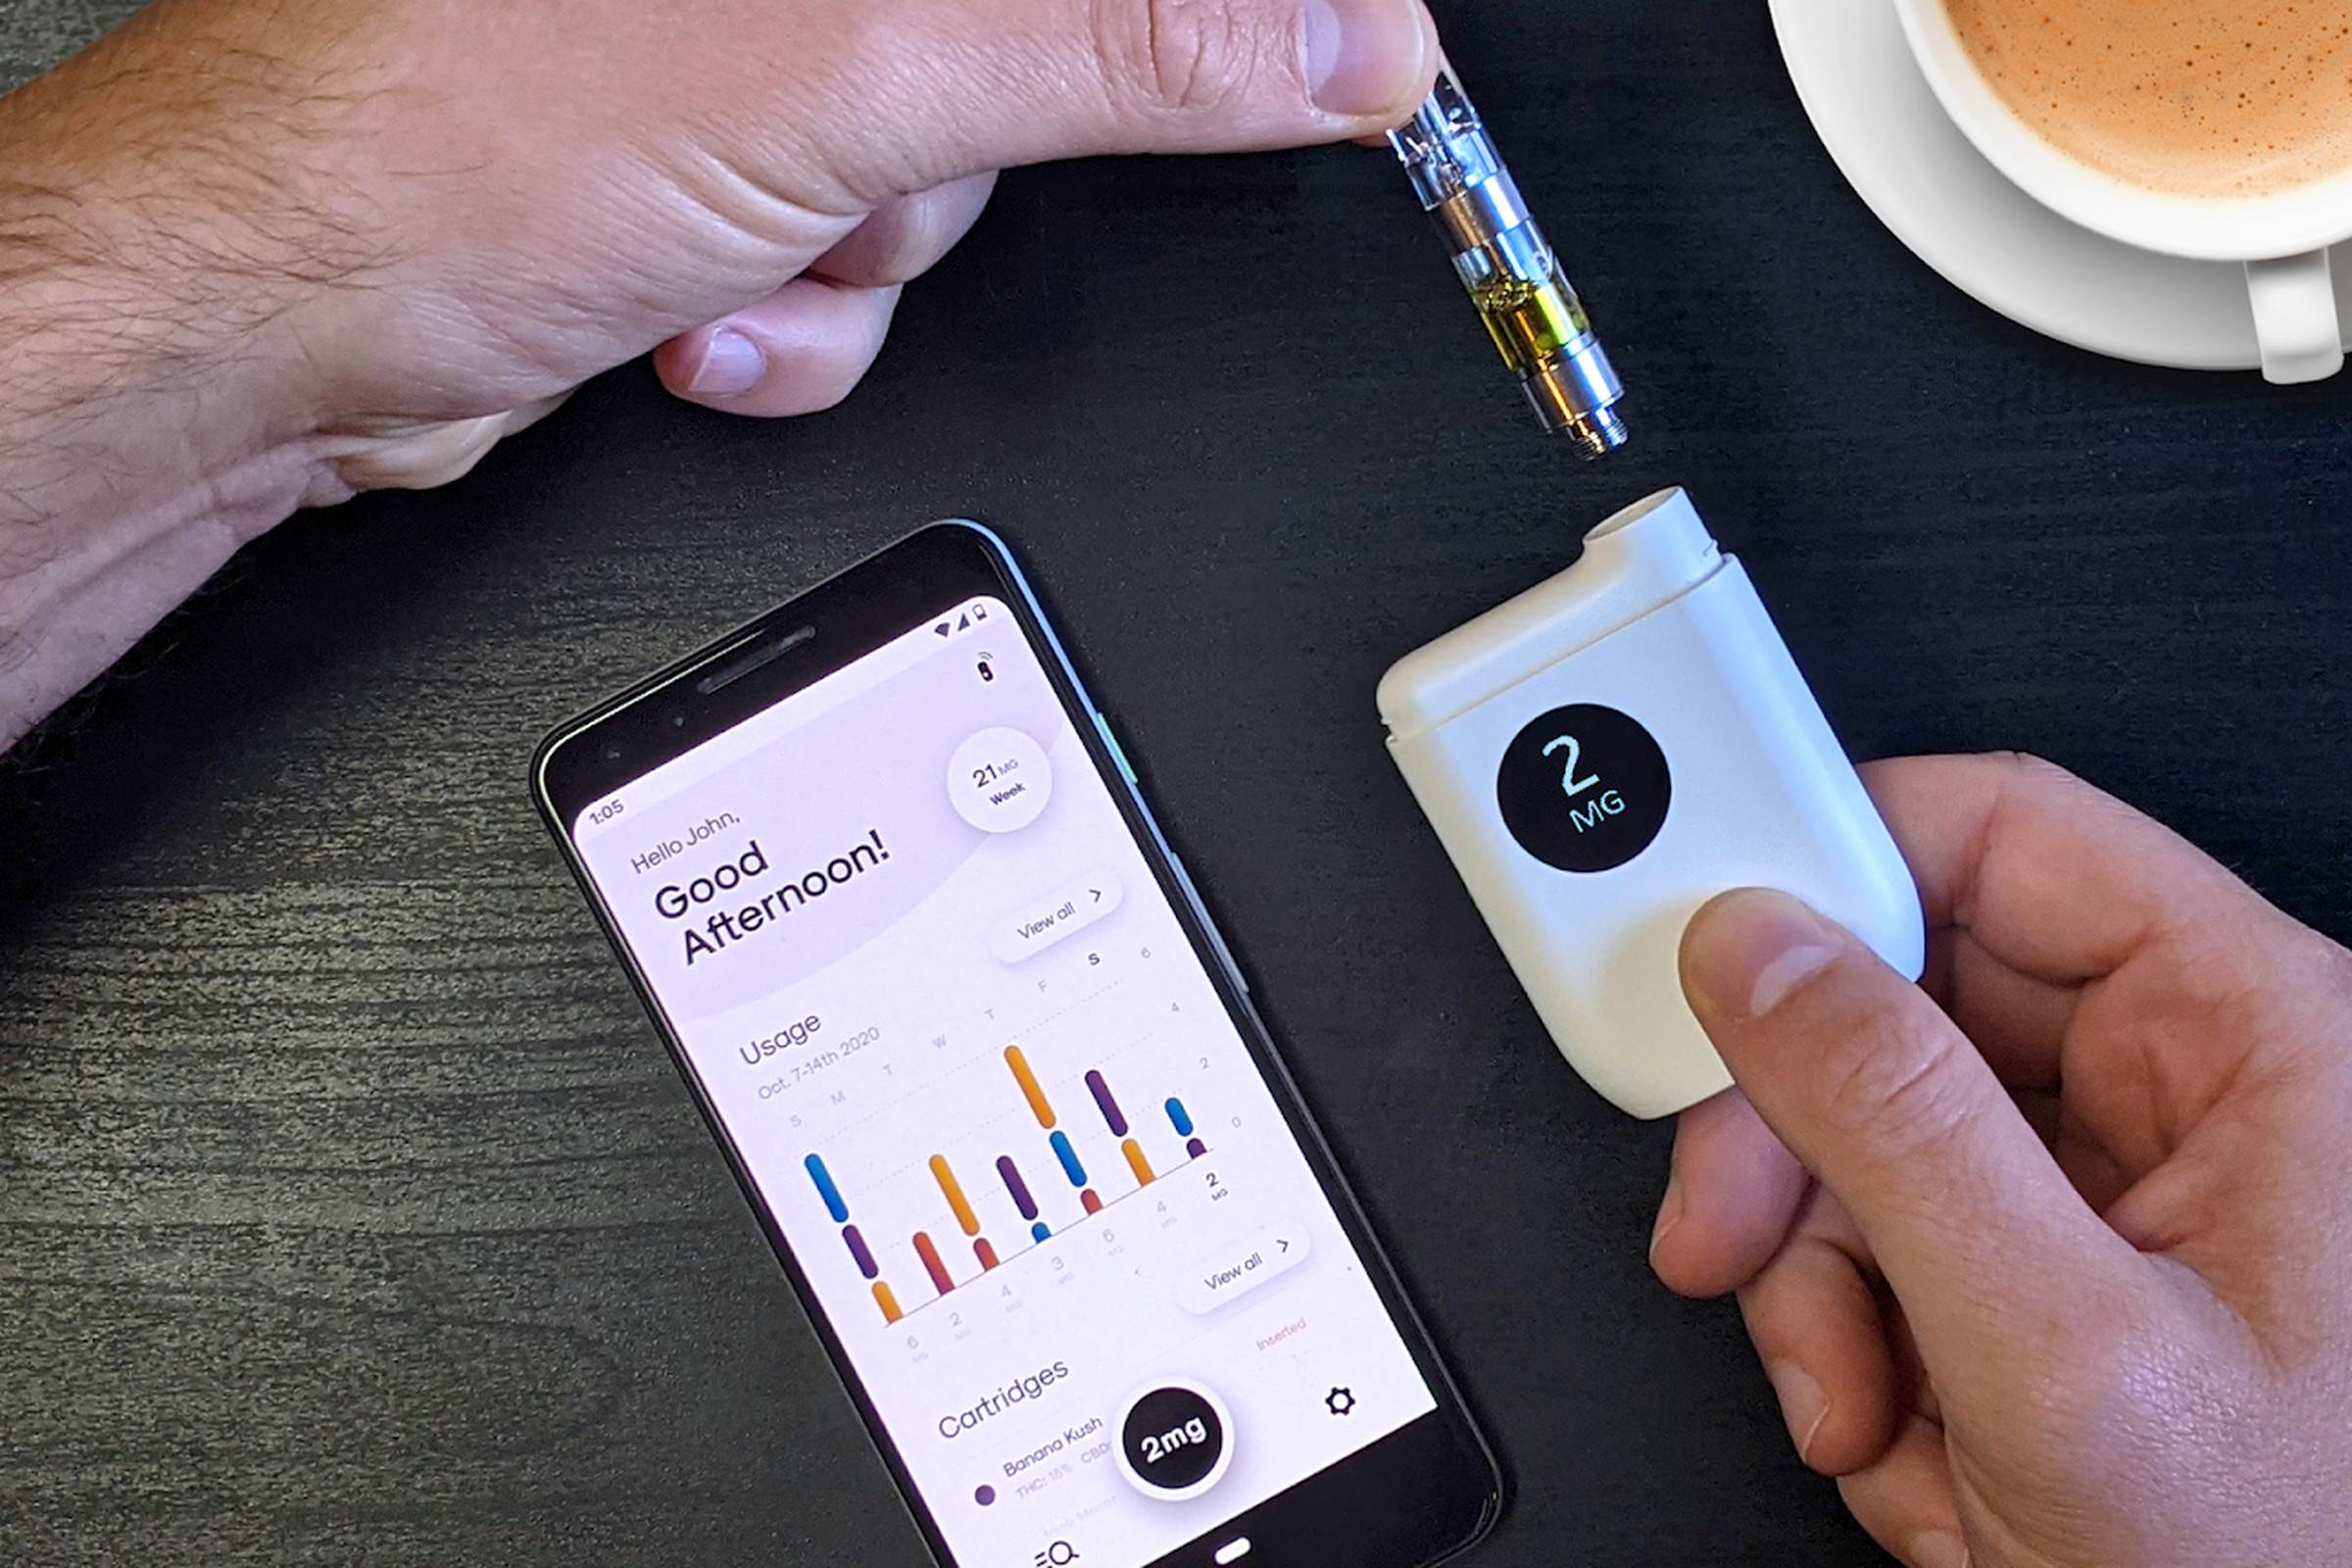 Mode says its smart cannabis device lets you control your dosage